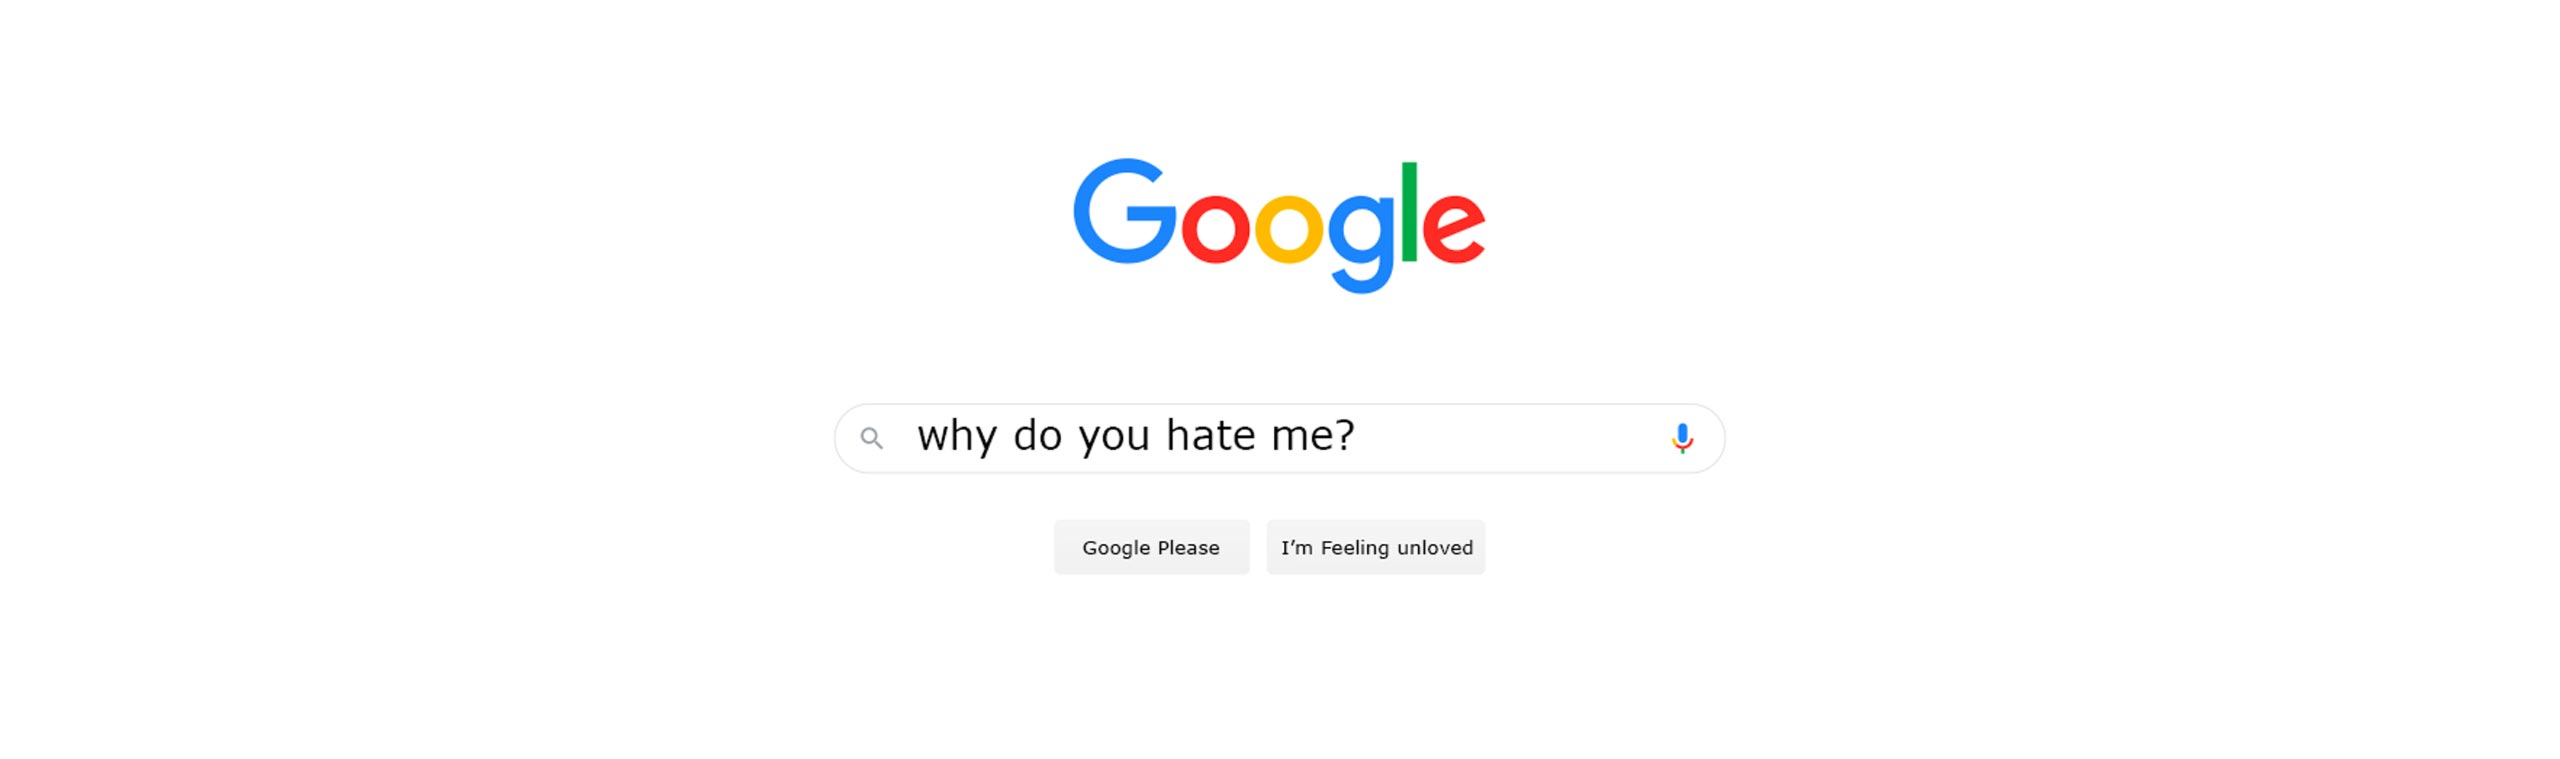 A mock-up of the google page, the search bar containing the question Why do you hate me?